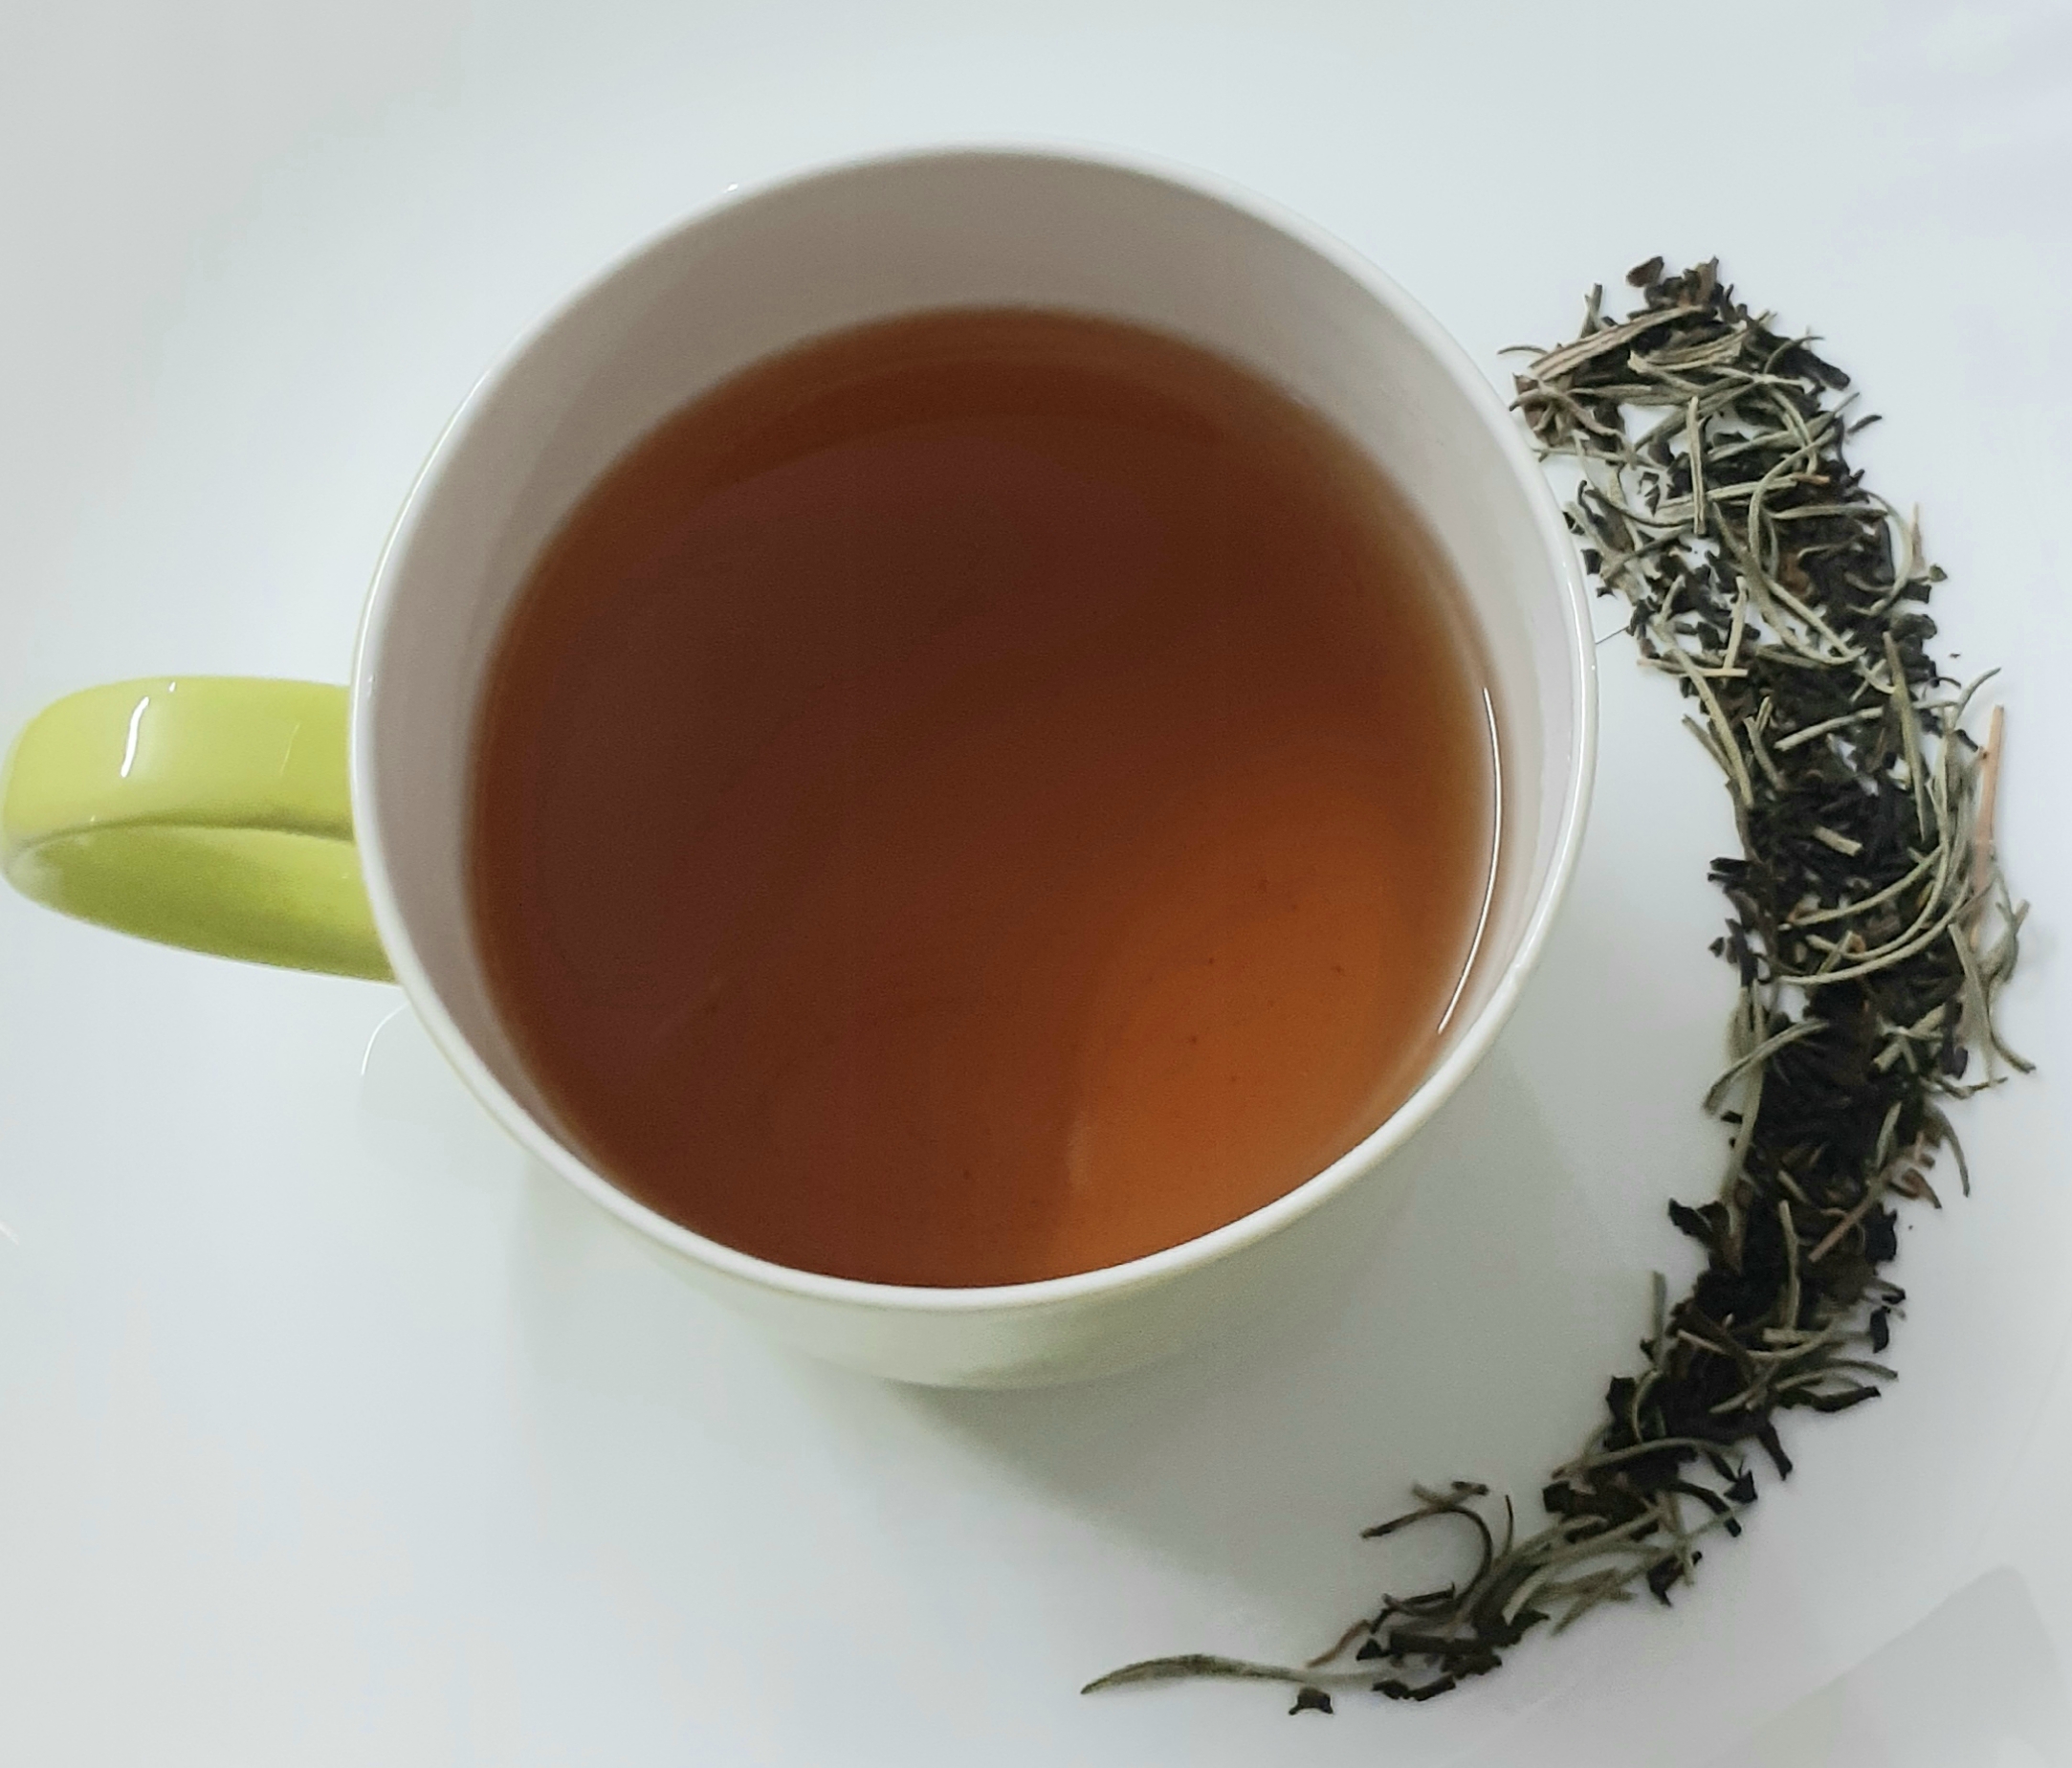 Rosemary tea health benefits, side effects and precautions